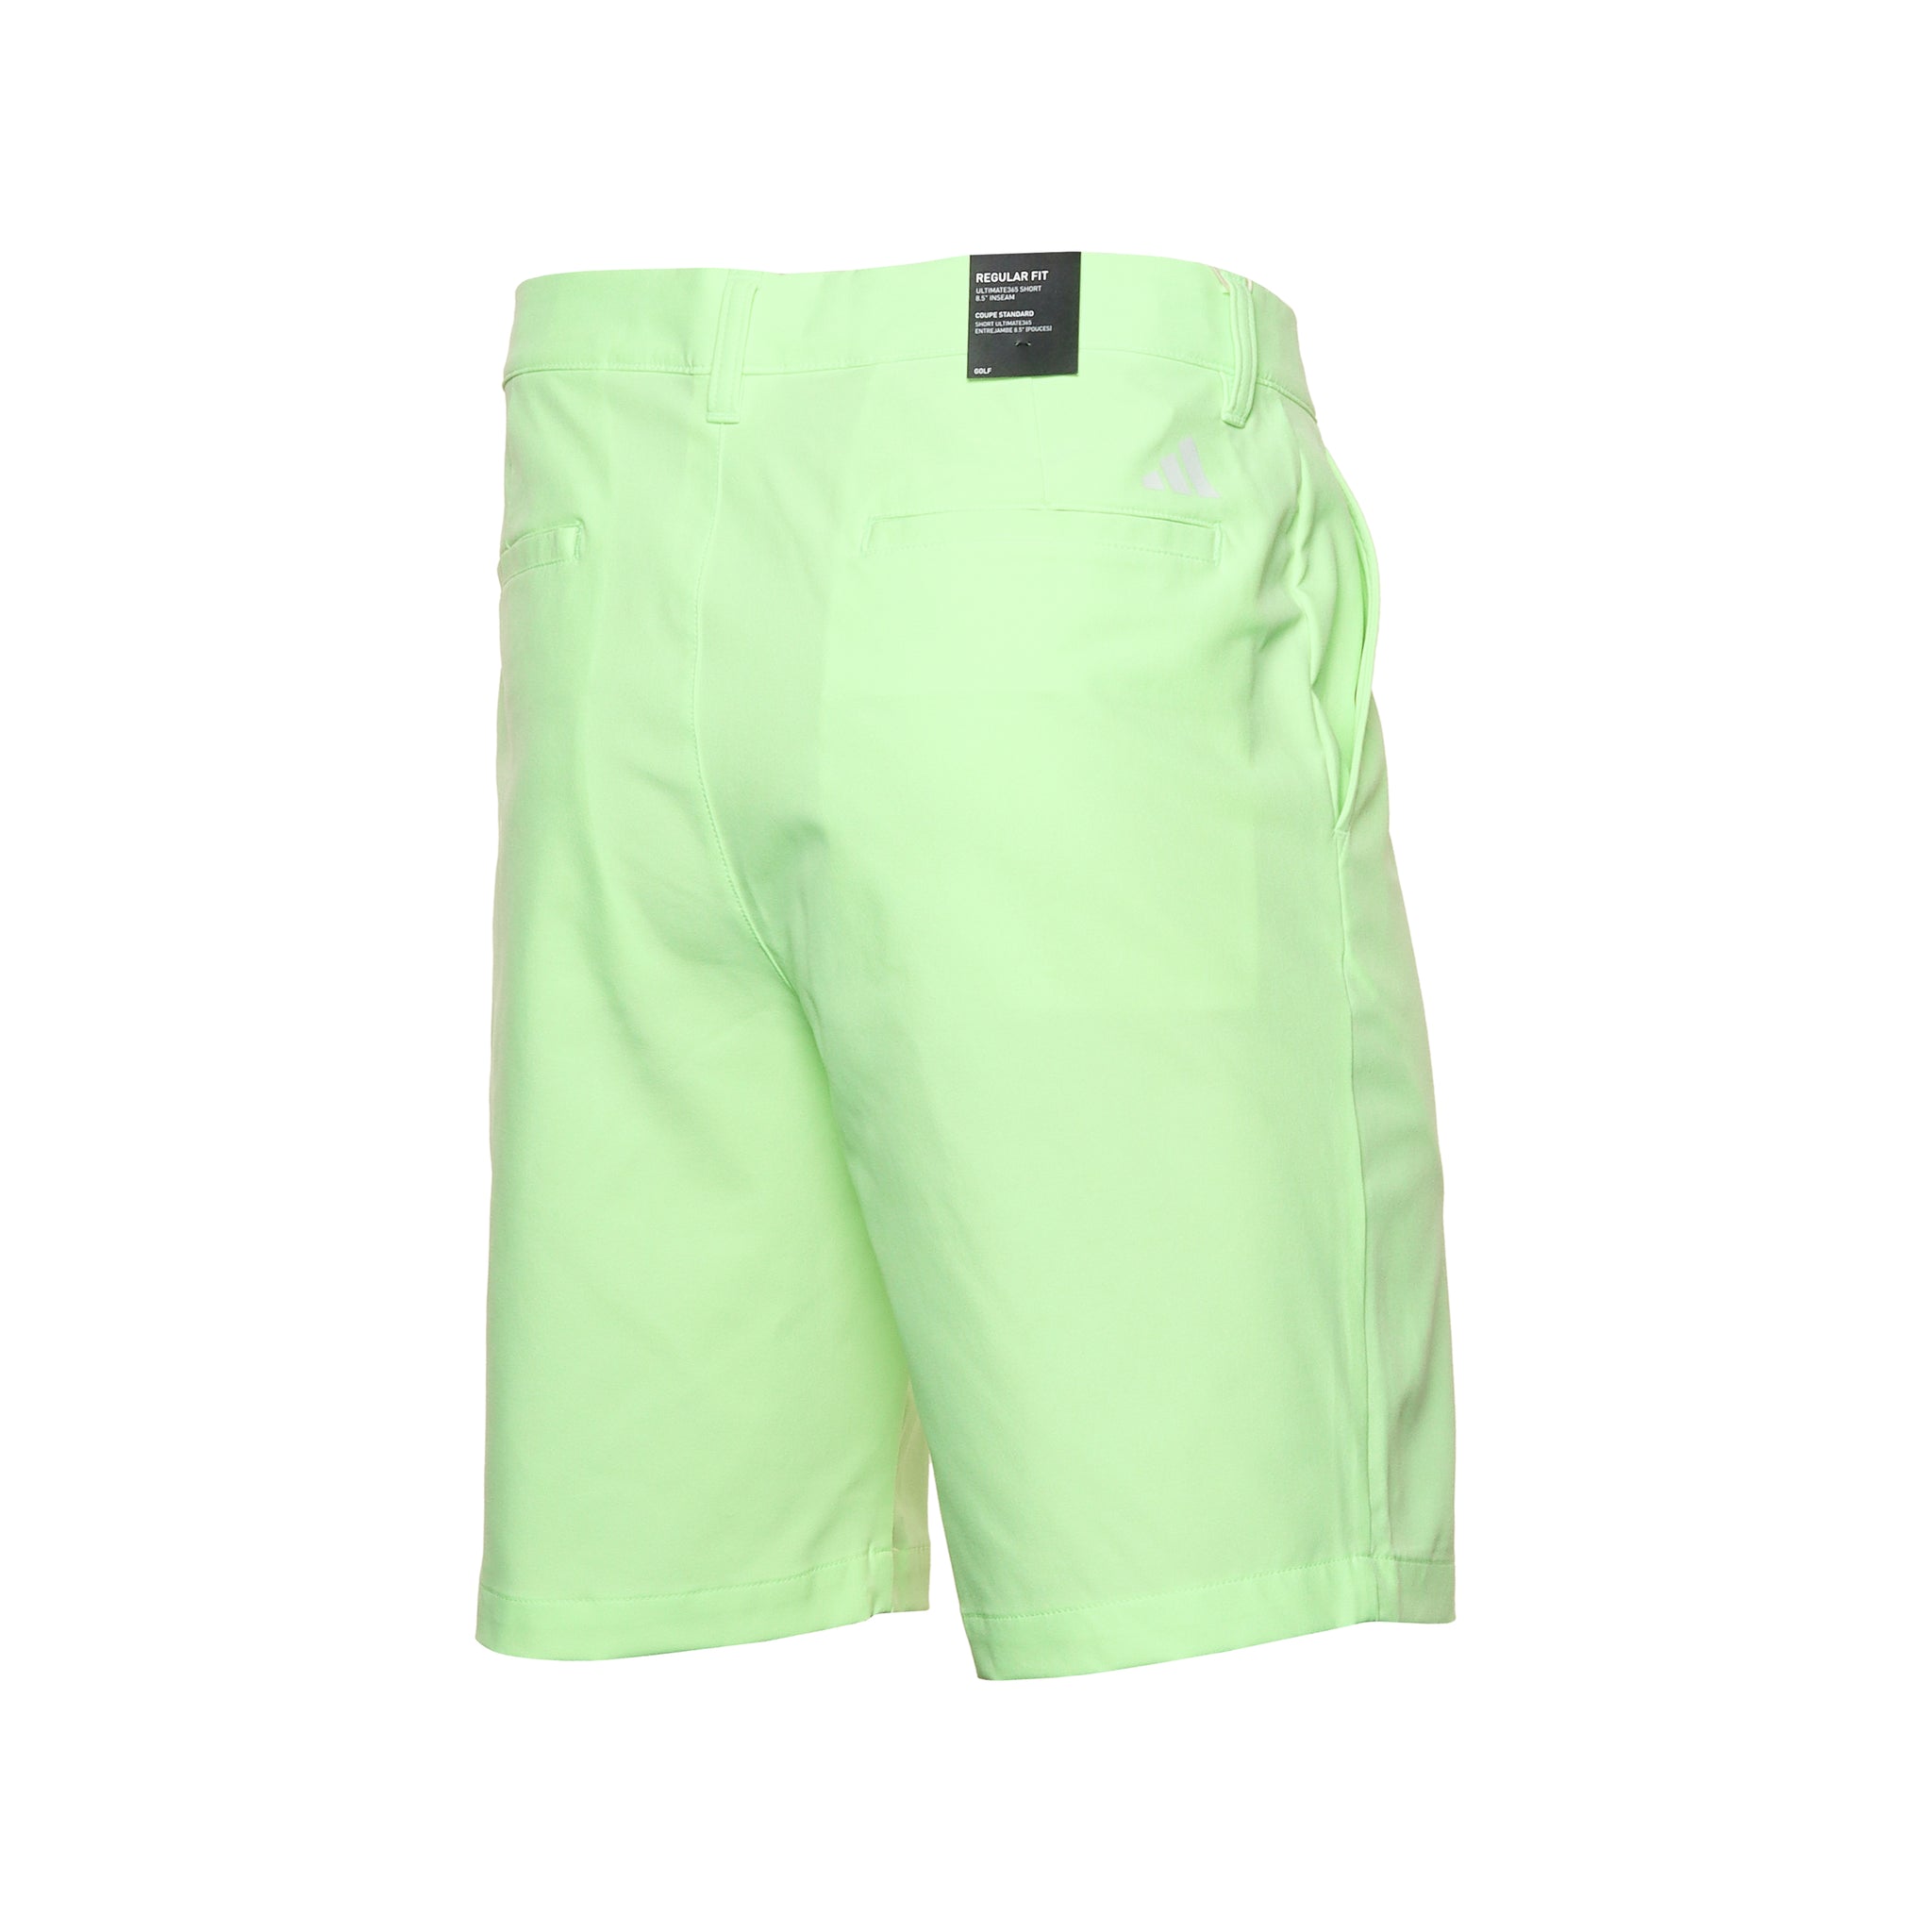 adidas-golf-ultimate365-8-5-shorts-in2465-green-spark